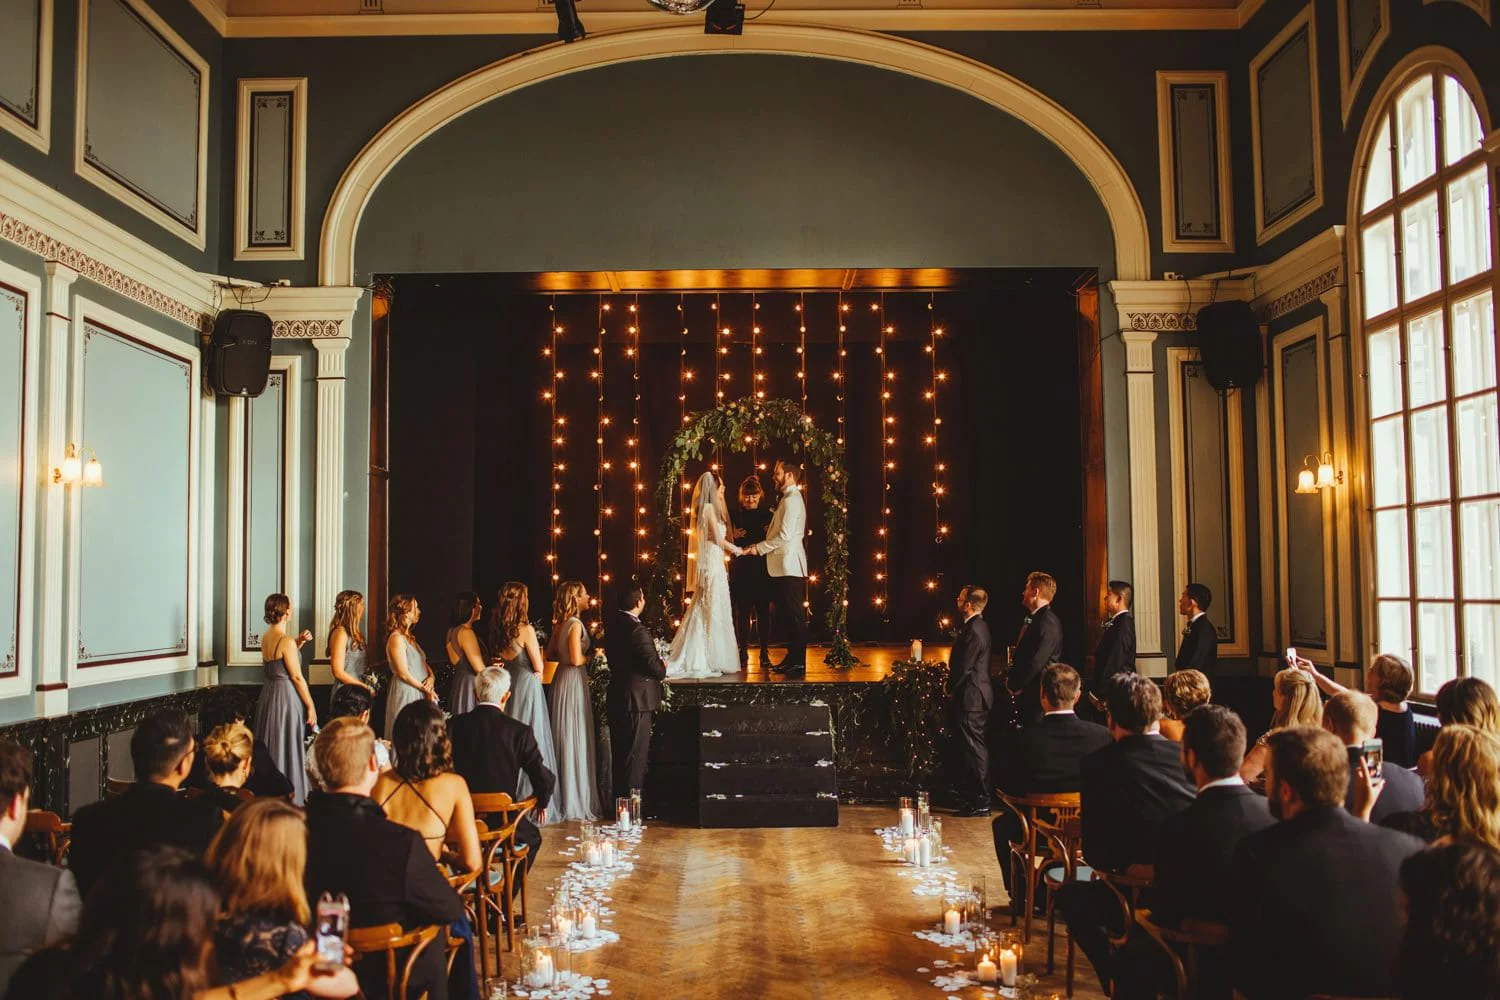 A couple being married in front of their loved ones at one of the most unique wedding venues in Europe, Idno Theatre, in Reykjavik, Iceland.